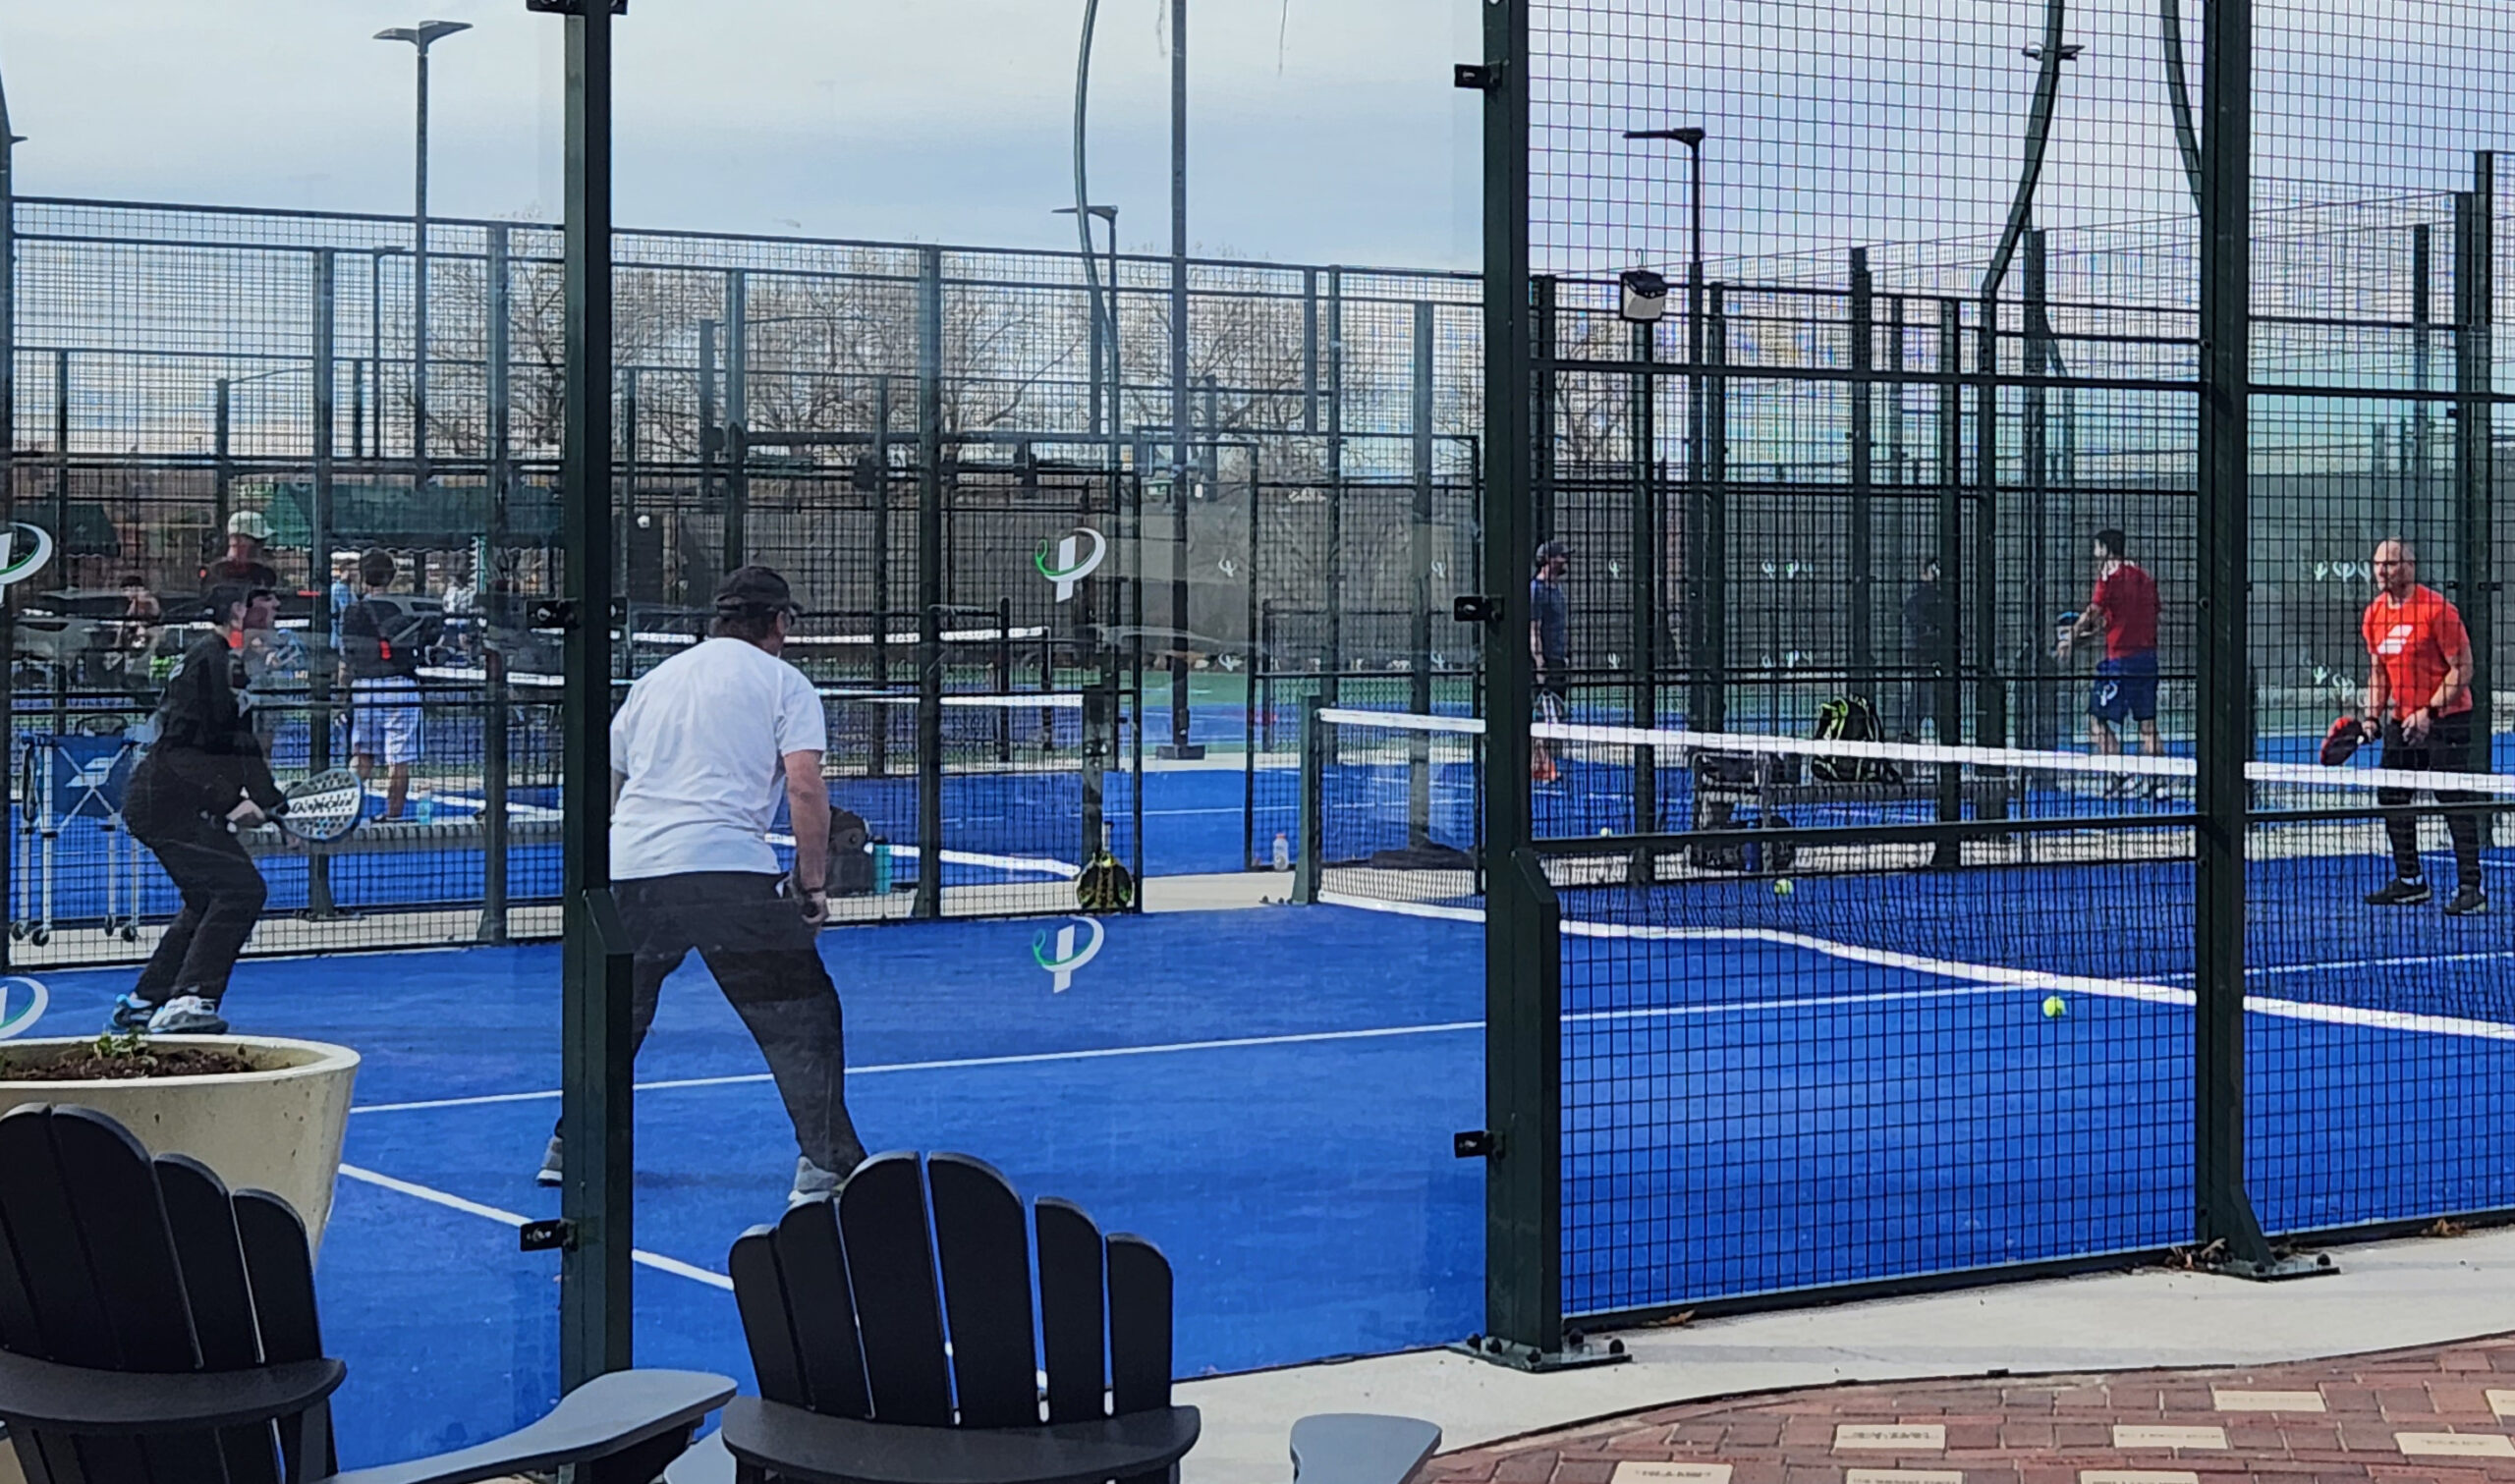 Padel scaled